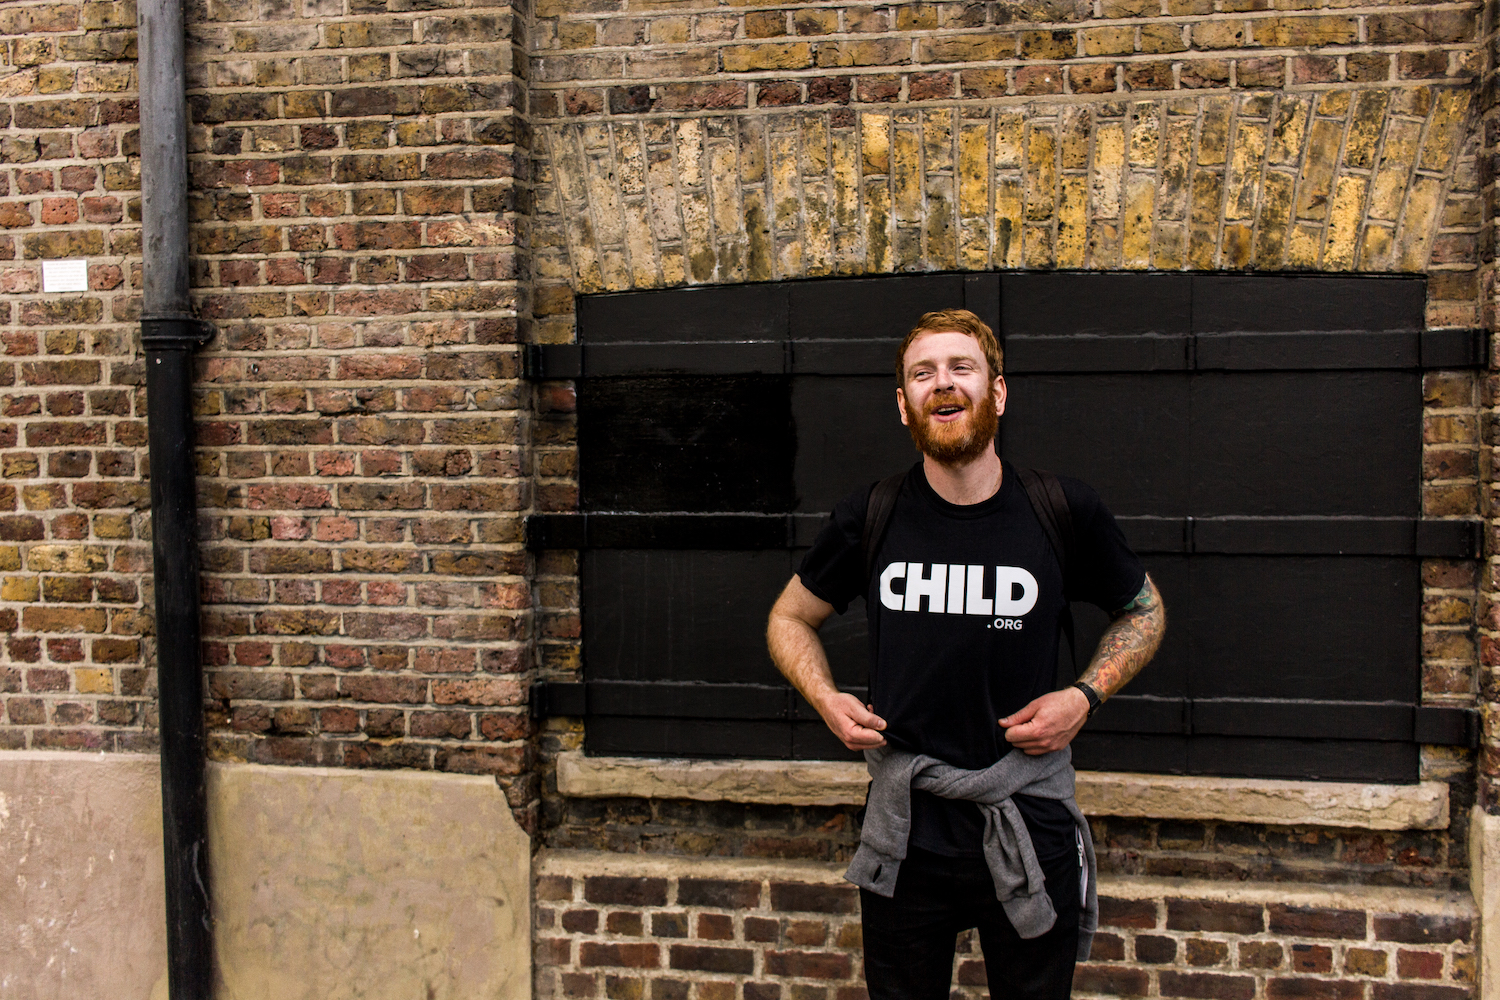 Professional Photography White Man With Beard Showing Black Child.org T-Shirt Standing In Front Of Brick Wall In Camden